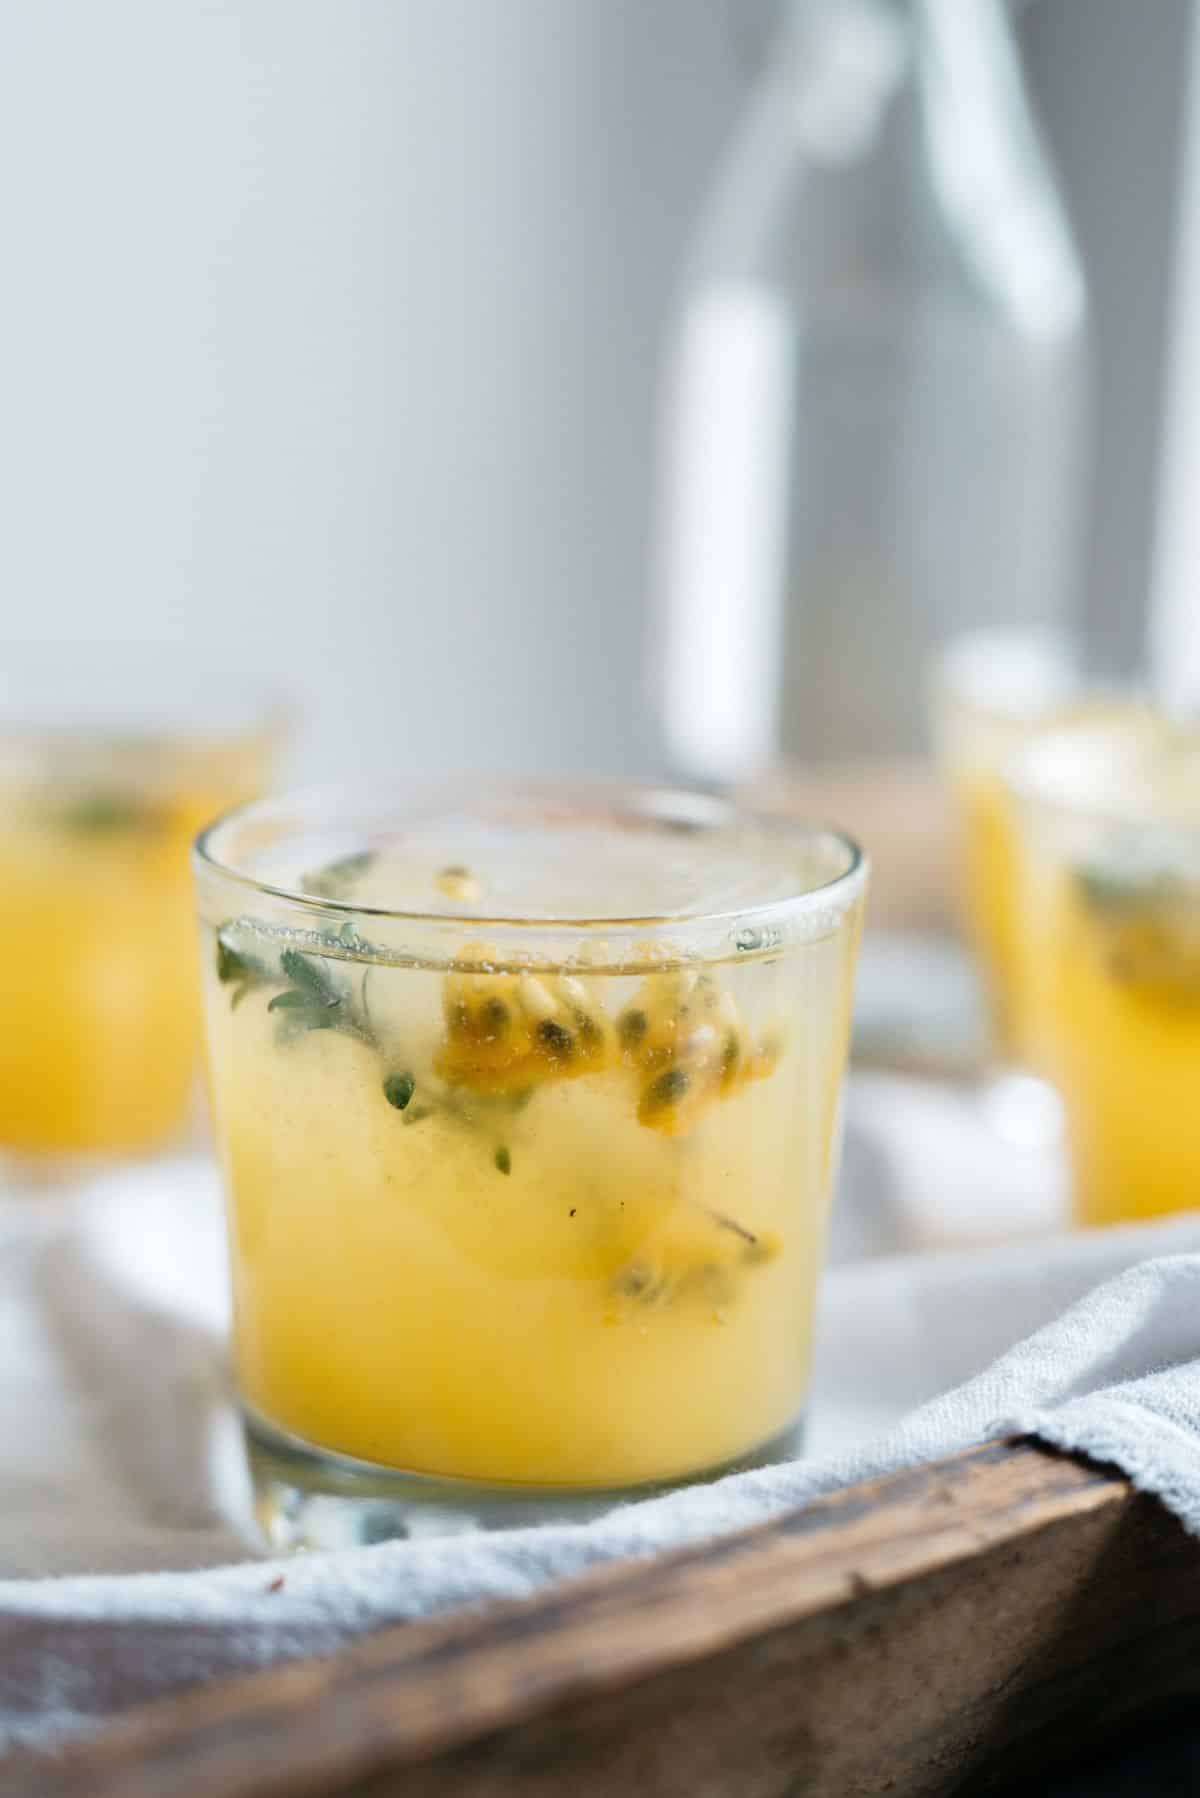 Delicious passion fruit and ginger fresca in a glass cup.